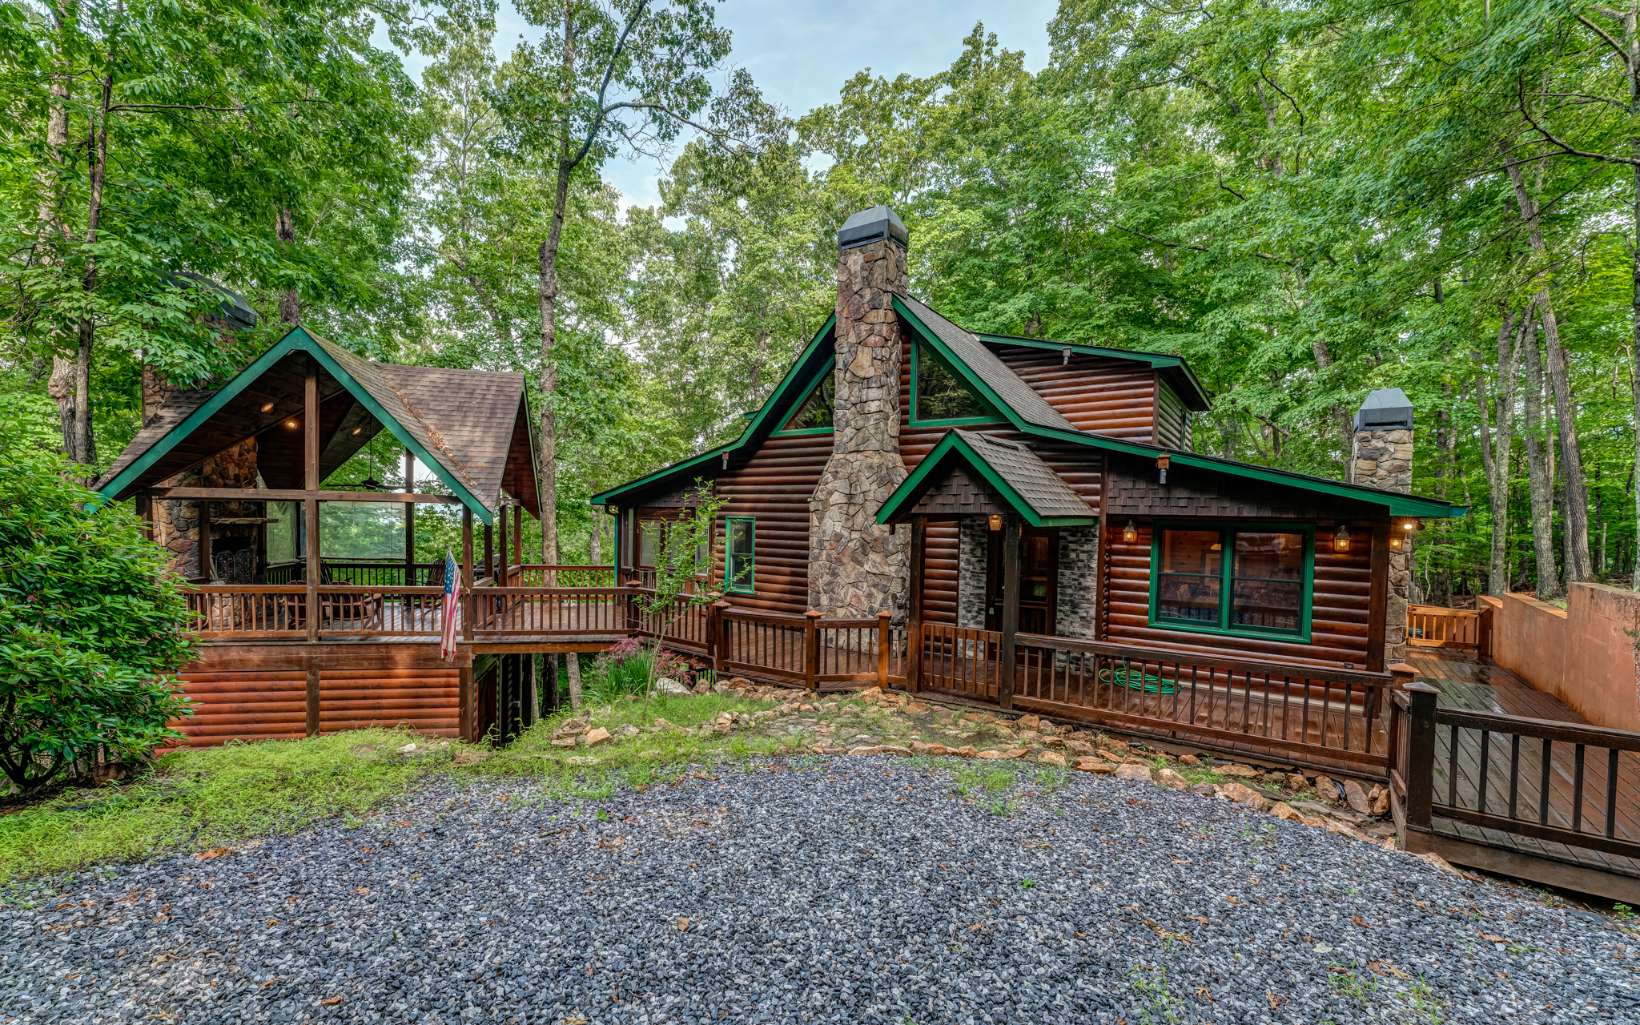 Look no further - your mountain paradise awaits! Solid cedar log siding is a sight to behold. Impeccably maintained, freshly stained and washed. This home is truly move-in ready like you’ve never seen. Expansive wraparound porch gives you a 360° view of the mountain wilderness all around. Detached outdoor fireplace is absolutely begging to be cuddled up next to. All-weather screened porch coverings make the decks enjoyable 365 days a year. Inside, you will find stunning tongue and groove cedar planks all throughout the home and solid hardwood floors flowing seamlessly throughout. Providing the luxurious cabin feel that you come to expect from the North Georgia mountains. Vaulted cathedral ceilings are absolutely spectacular. Large, spacious windows allow the natural light to beam through, so you can truly enjoy the outside coming in. Open floorplan main level, with updated kitchen overlooking the main living spaces. Complete with updated stone countertops, stainless steel appliances, subway tile, and so much more! This is truly a chef's dream kitchen. Expansive dining area seats as many people as you can invite! Gas fireplaces are located in nearly every room throughout. So you never miss out on a cool night by a cozy fire. Bathrooms have all been updated to the nines, including walk-in showers and floor to ceiling tile. Oversized master suite includes a private owner's closet, sizable en suite, sitting area with its own dedicated fireplace, and 180° storm windows to overloo